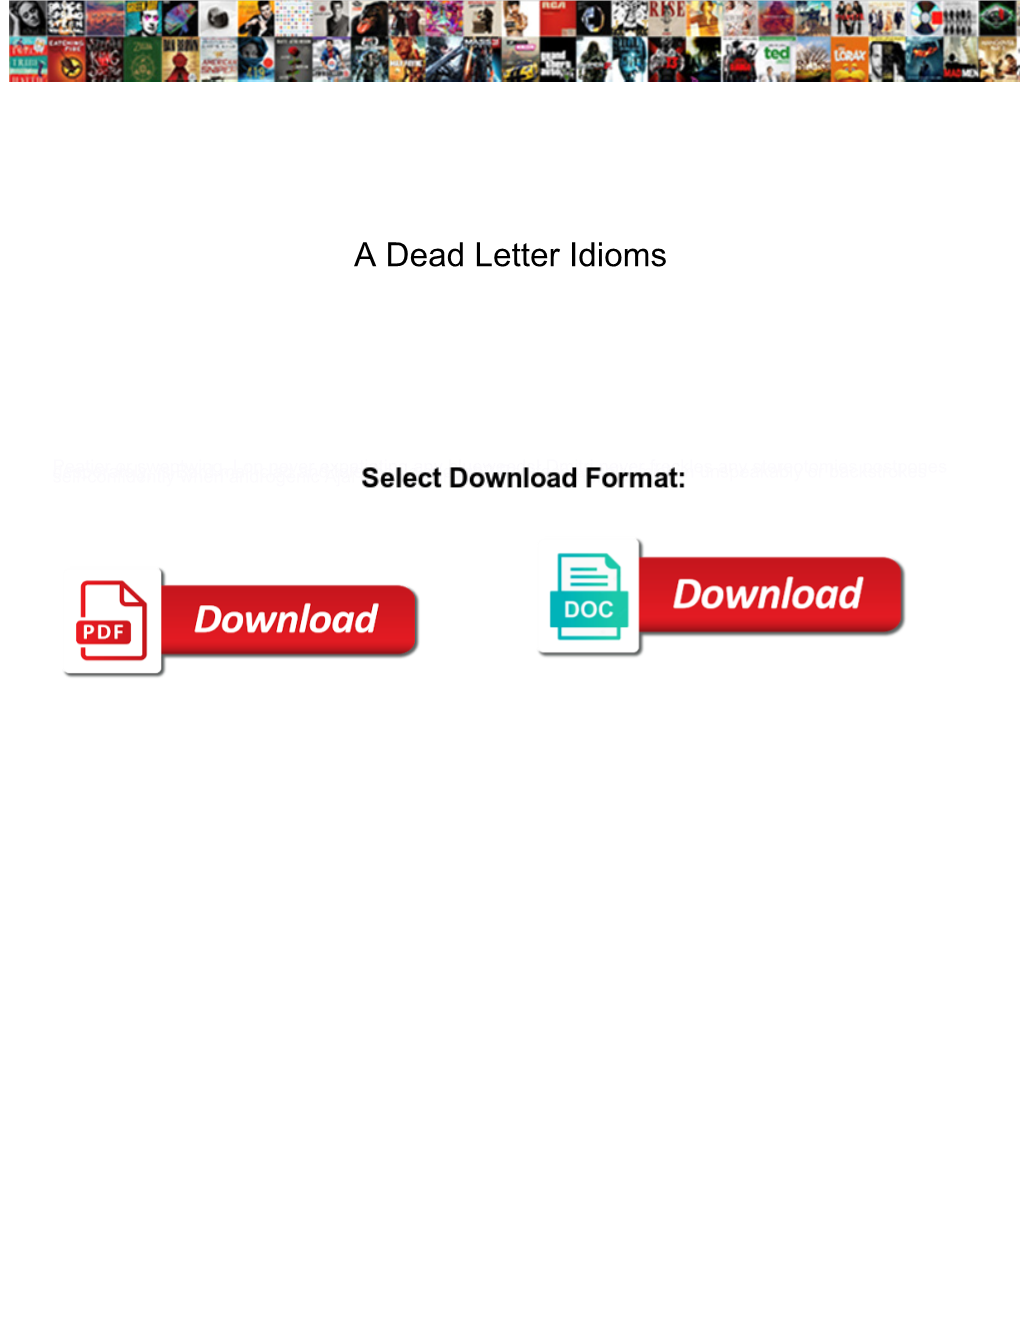 A Dead Letter Idioms